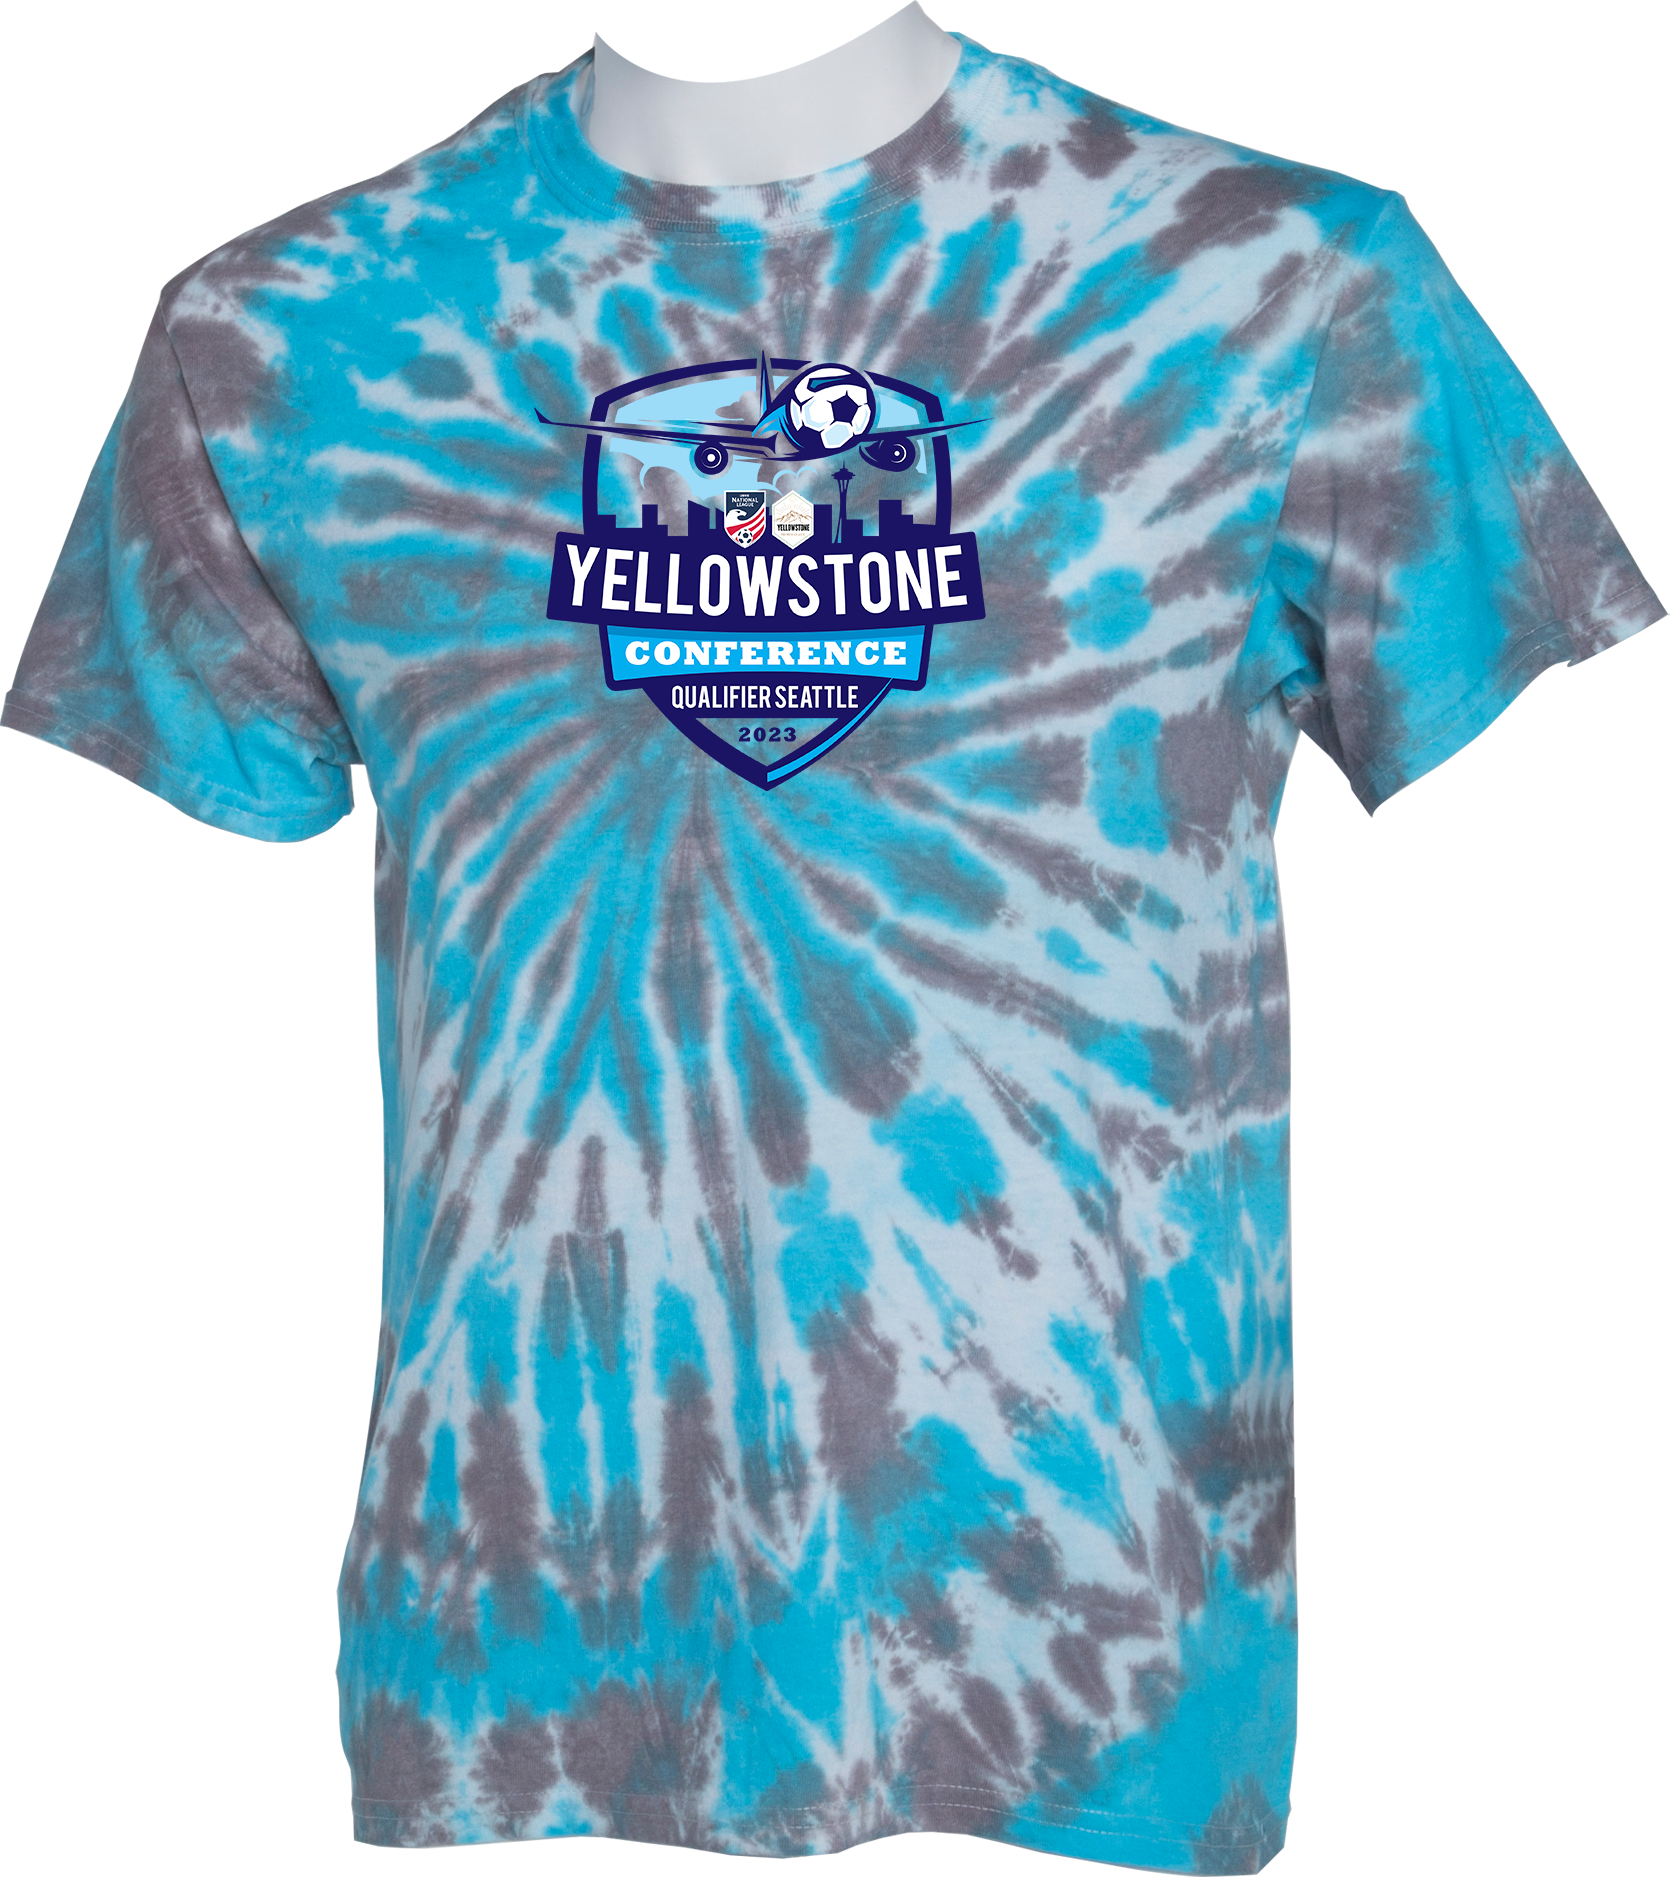 TIE-DYE SHORT SLEEVES - 2023 Yellowstone Conference Qualifier Seattle